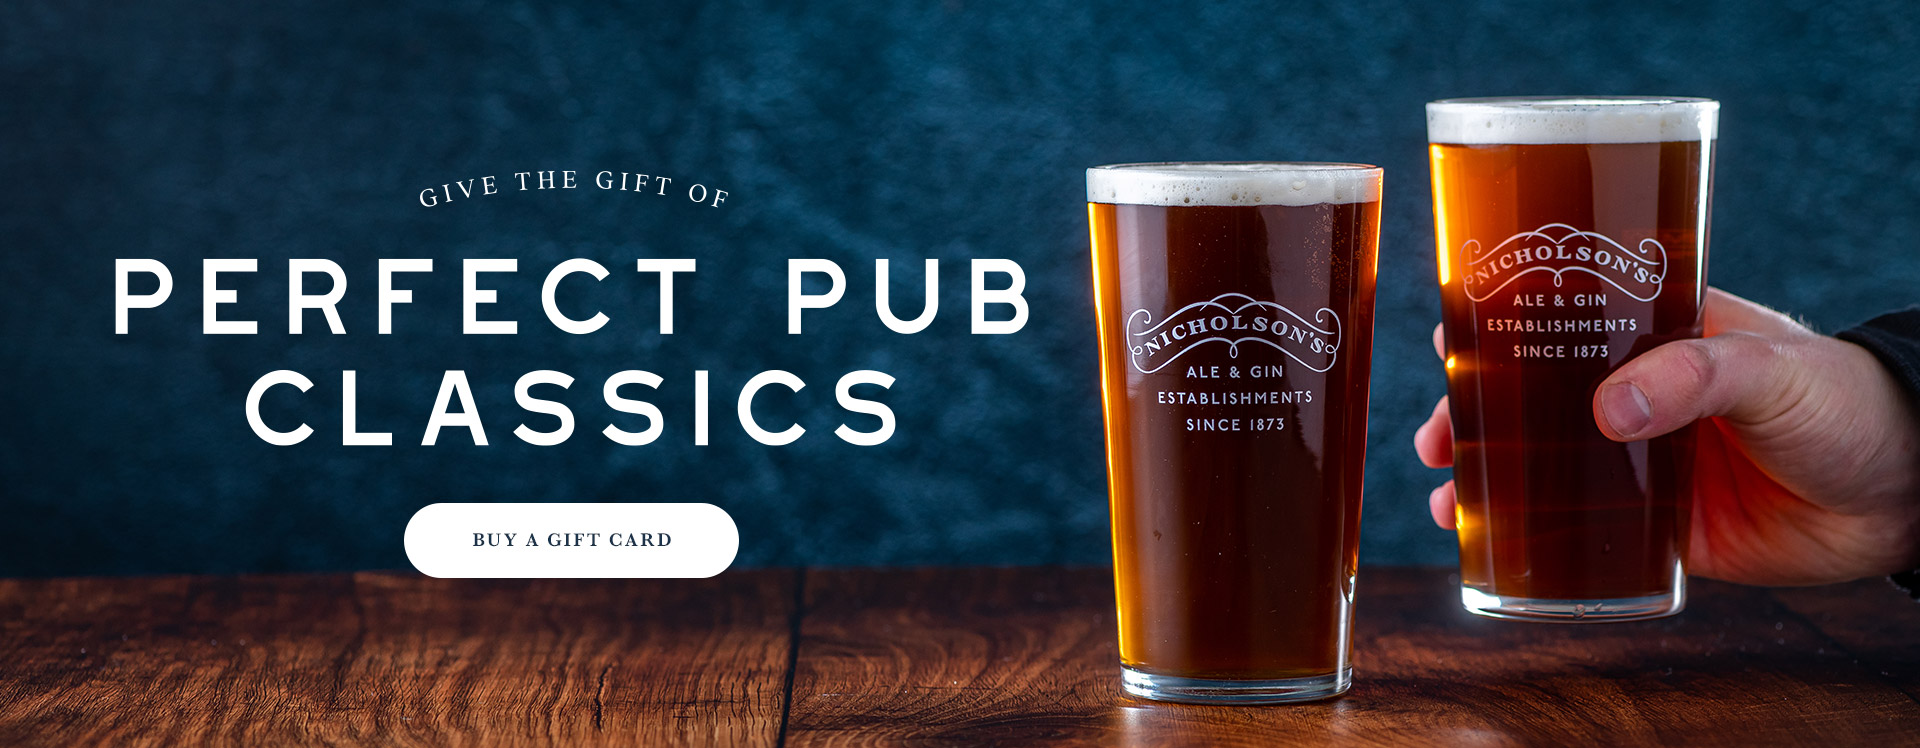 Nicholson’s Pub Gift Voucher at The Lord Aberconway in London